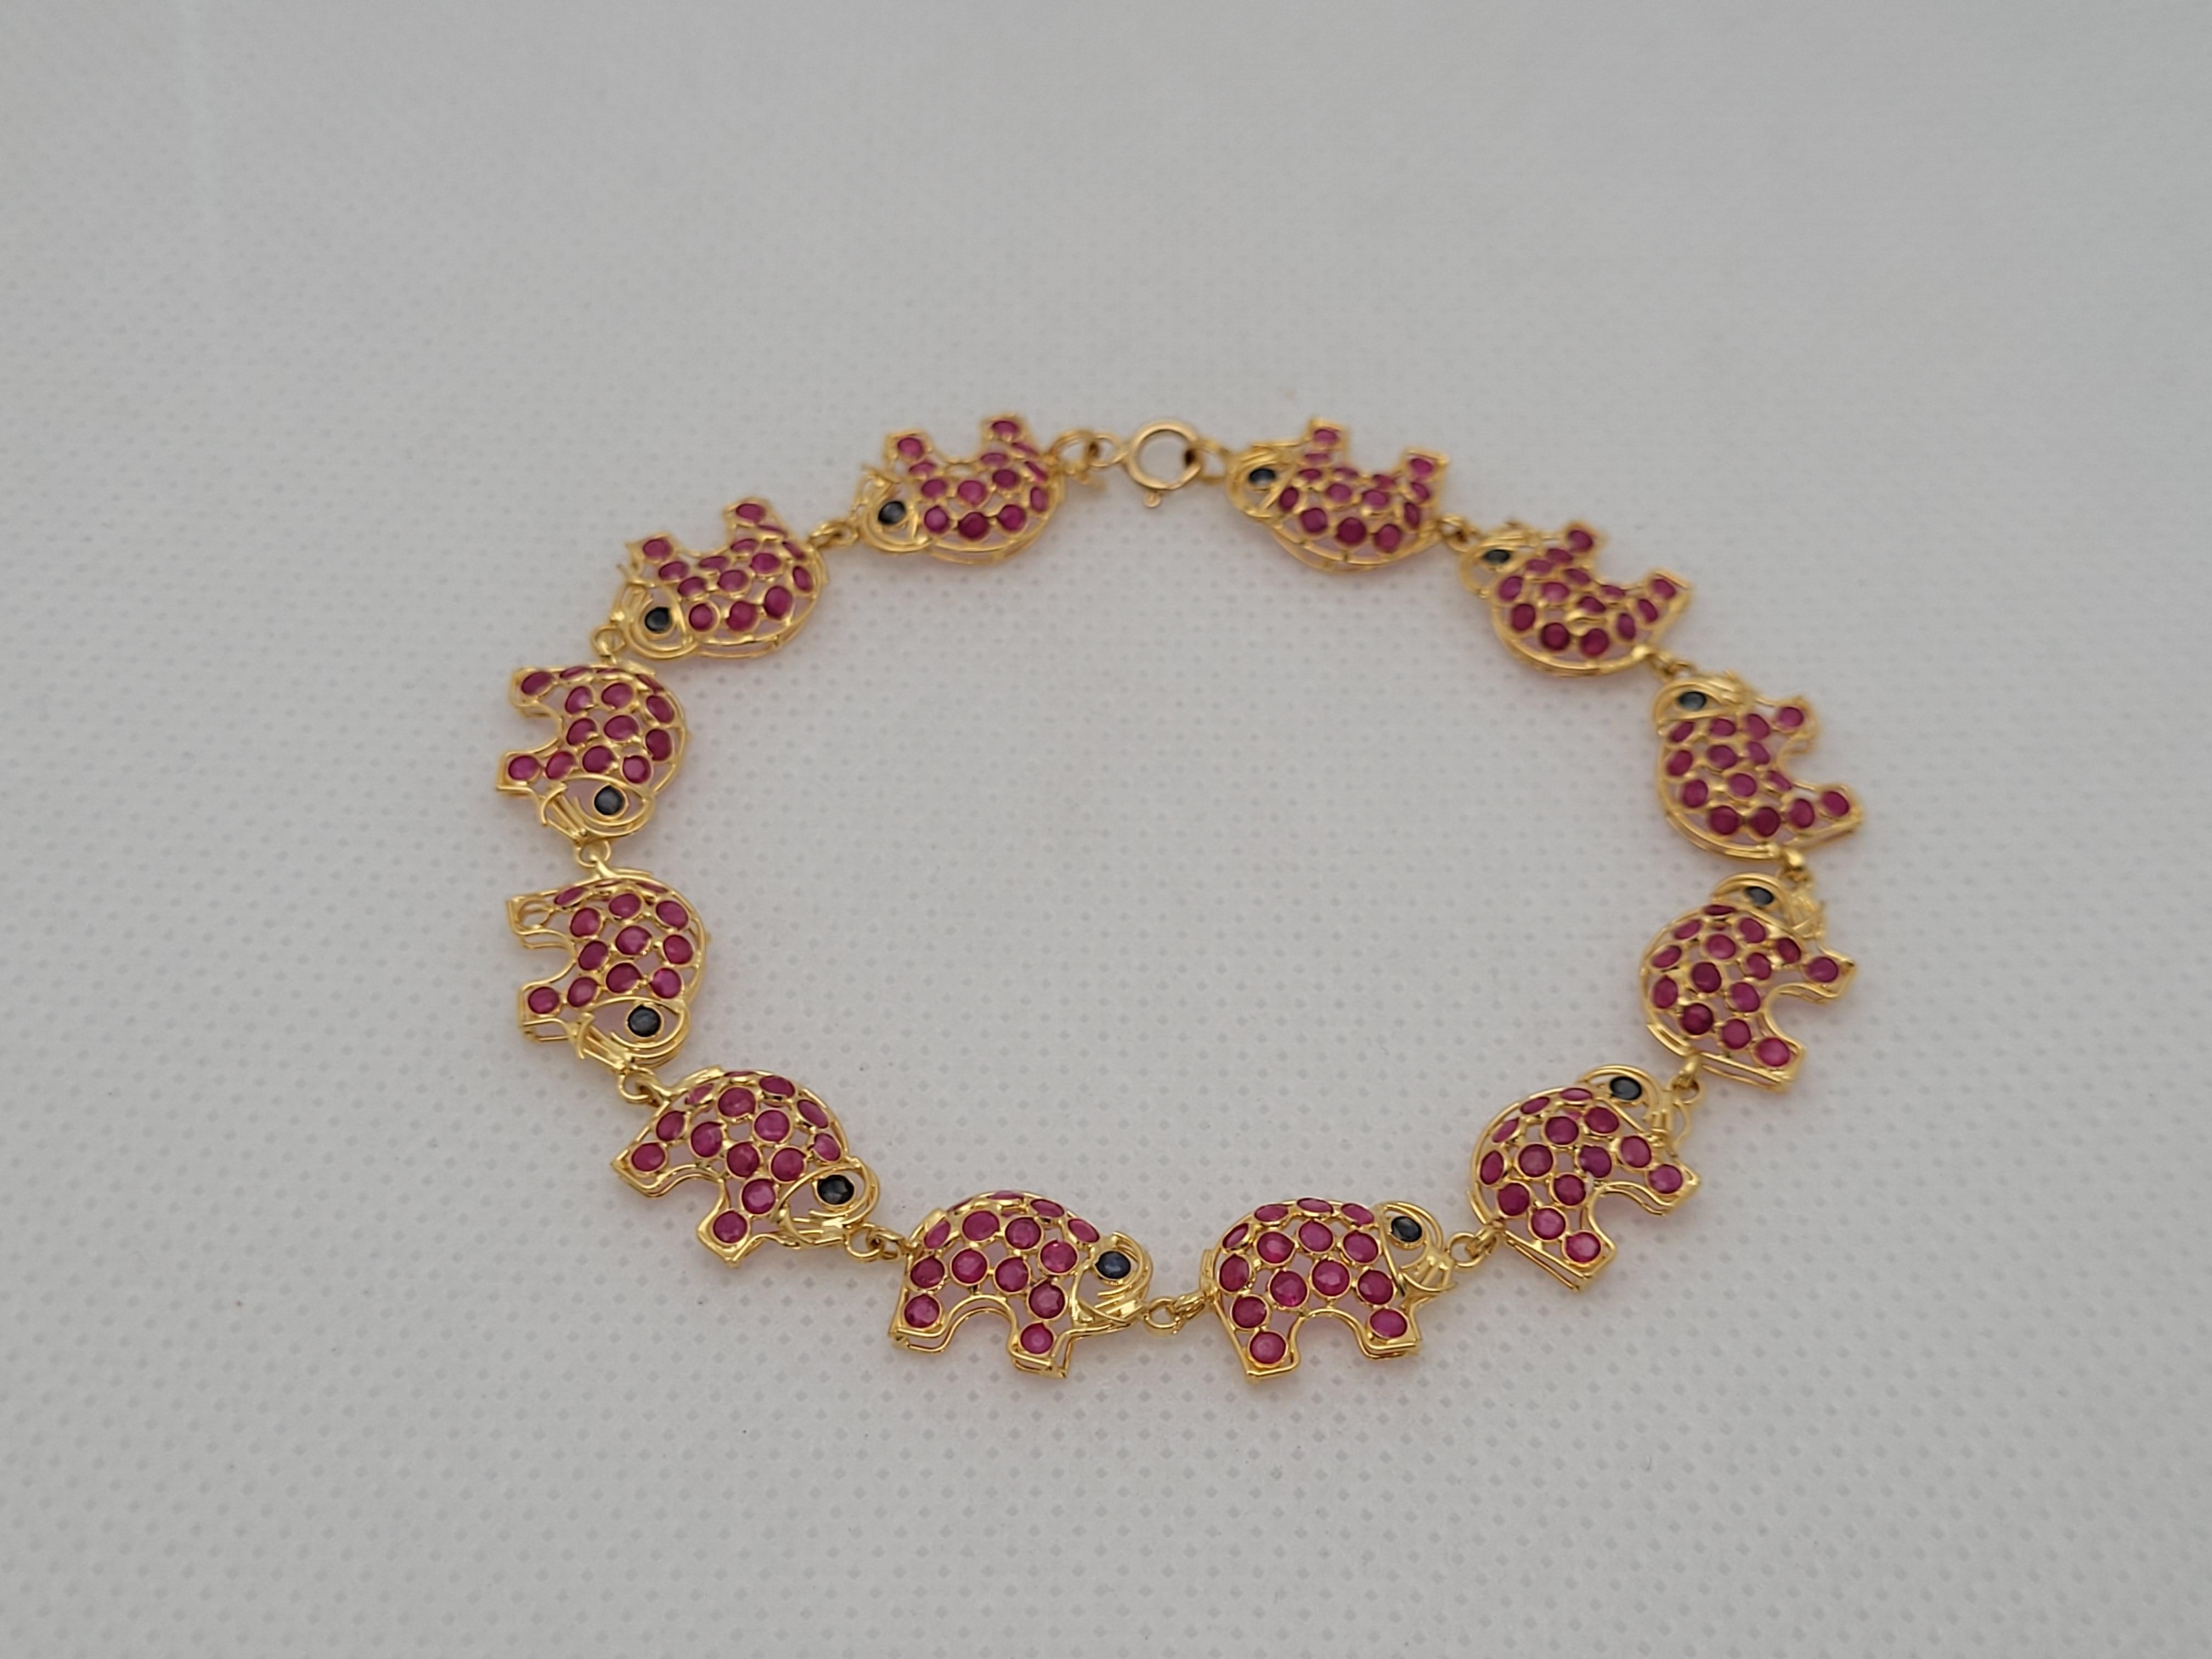 The 18kt Yellow Gold Ruby Sapphire Elephant Link Bracelet is a stunning piece of jewelry that combines elegance and charm. Crafted in high-quality yellow gold, this bracelet features a unique design of elephant links adorned with vibrant rubies and